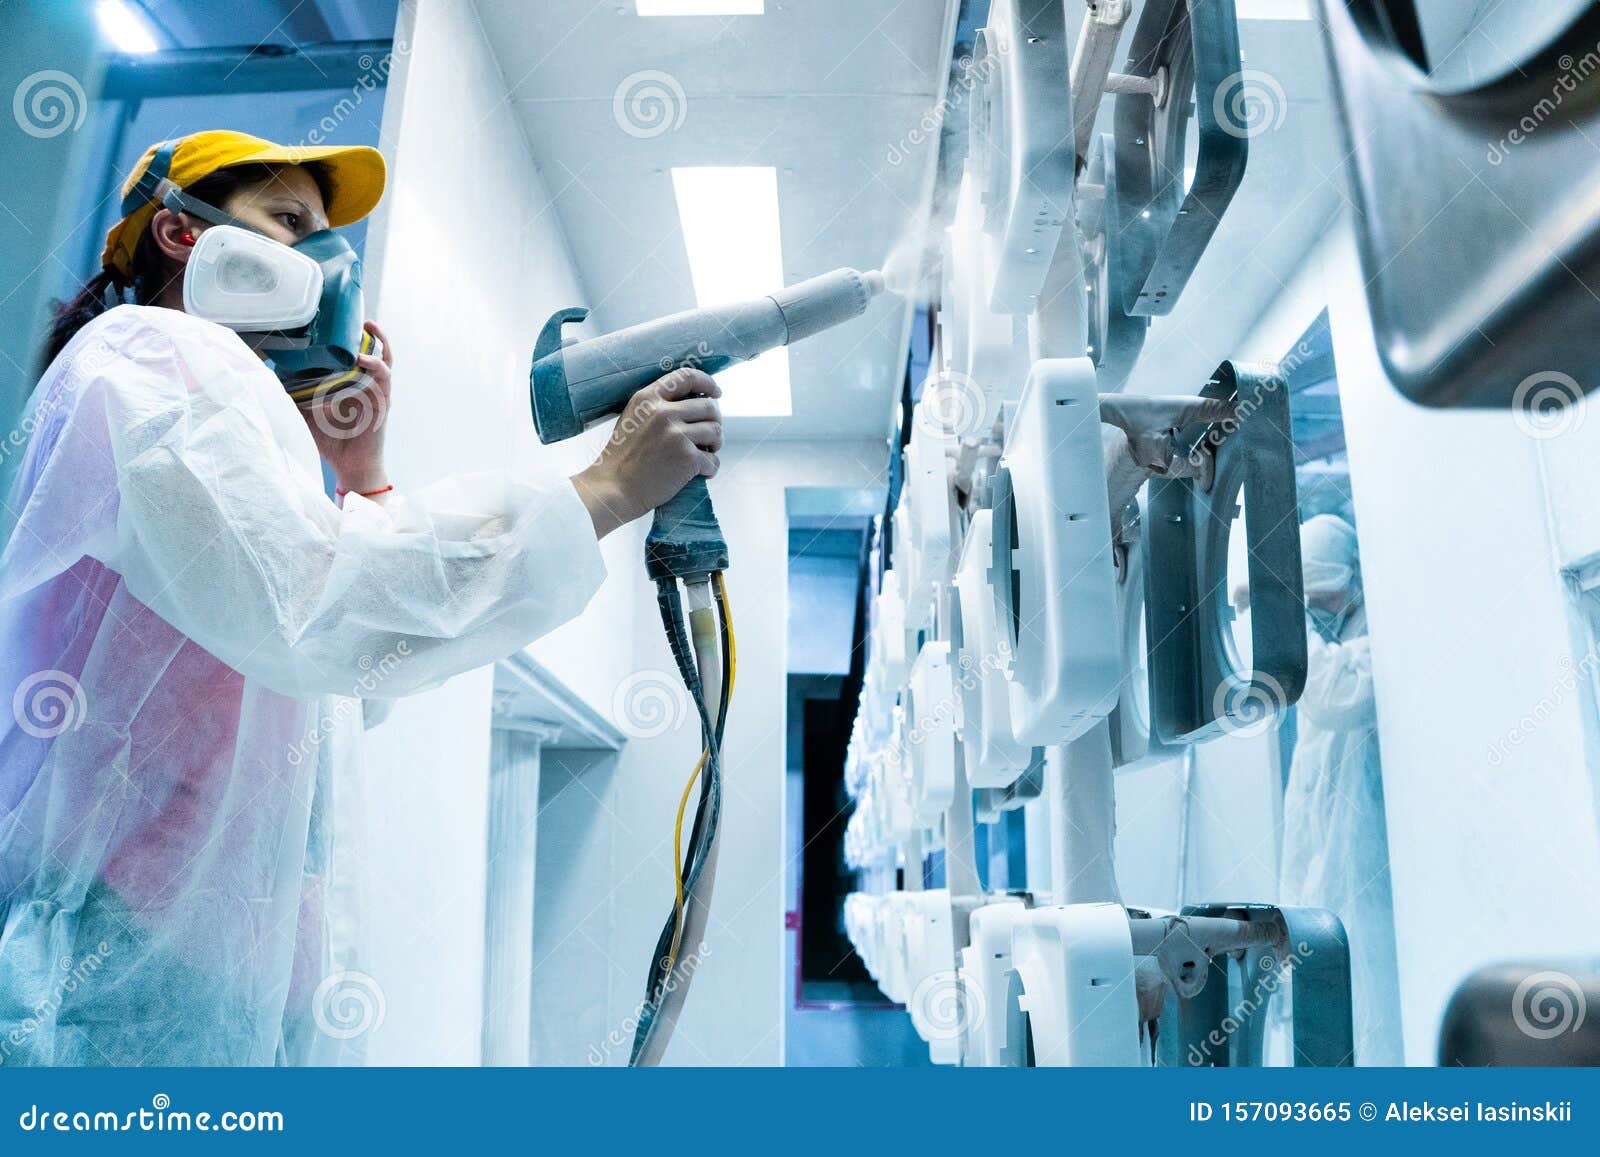 powder coating of metal parts. a woman in a protective suit sprays white powder paint from a gun on metal products